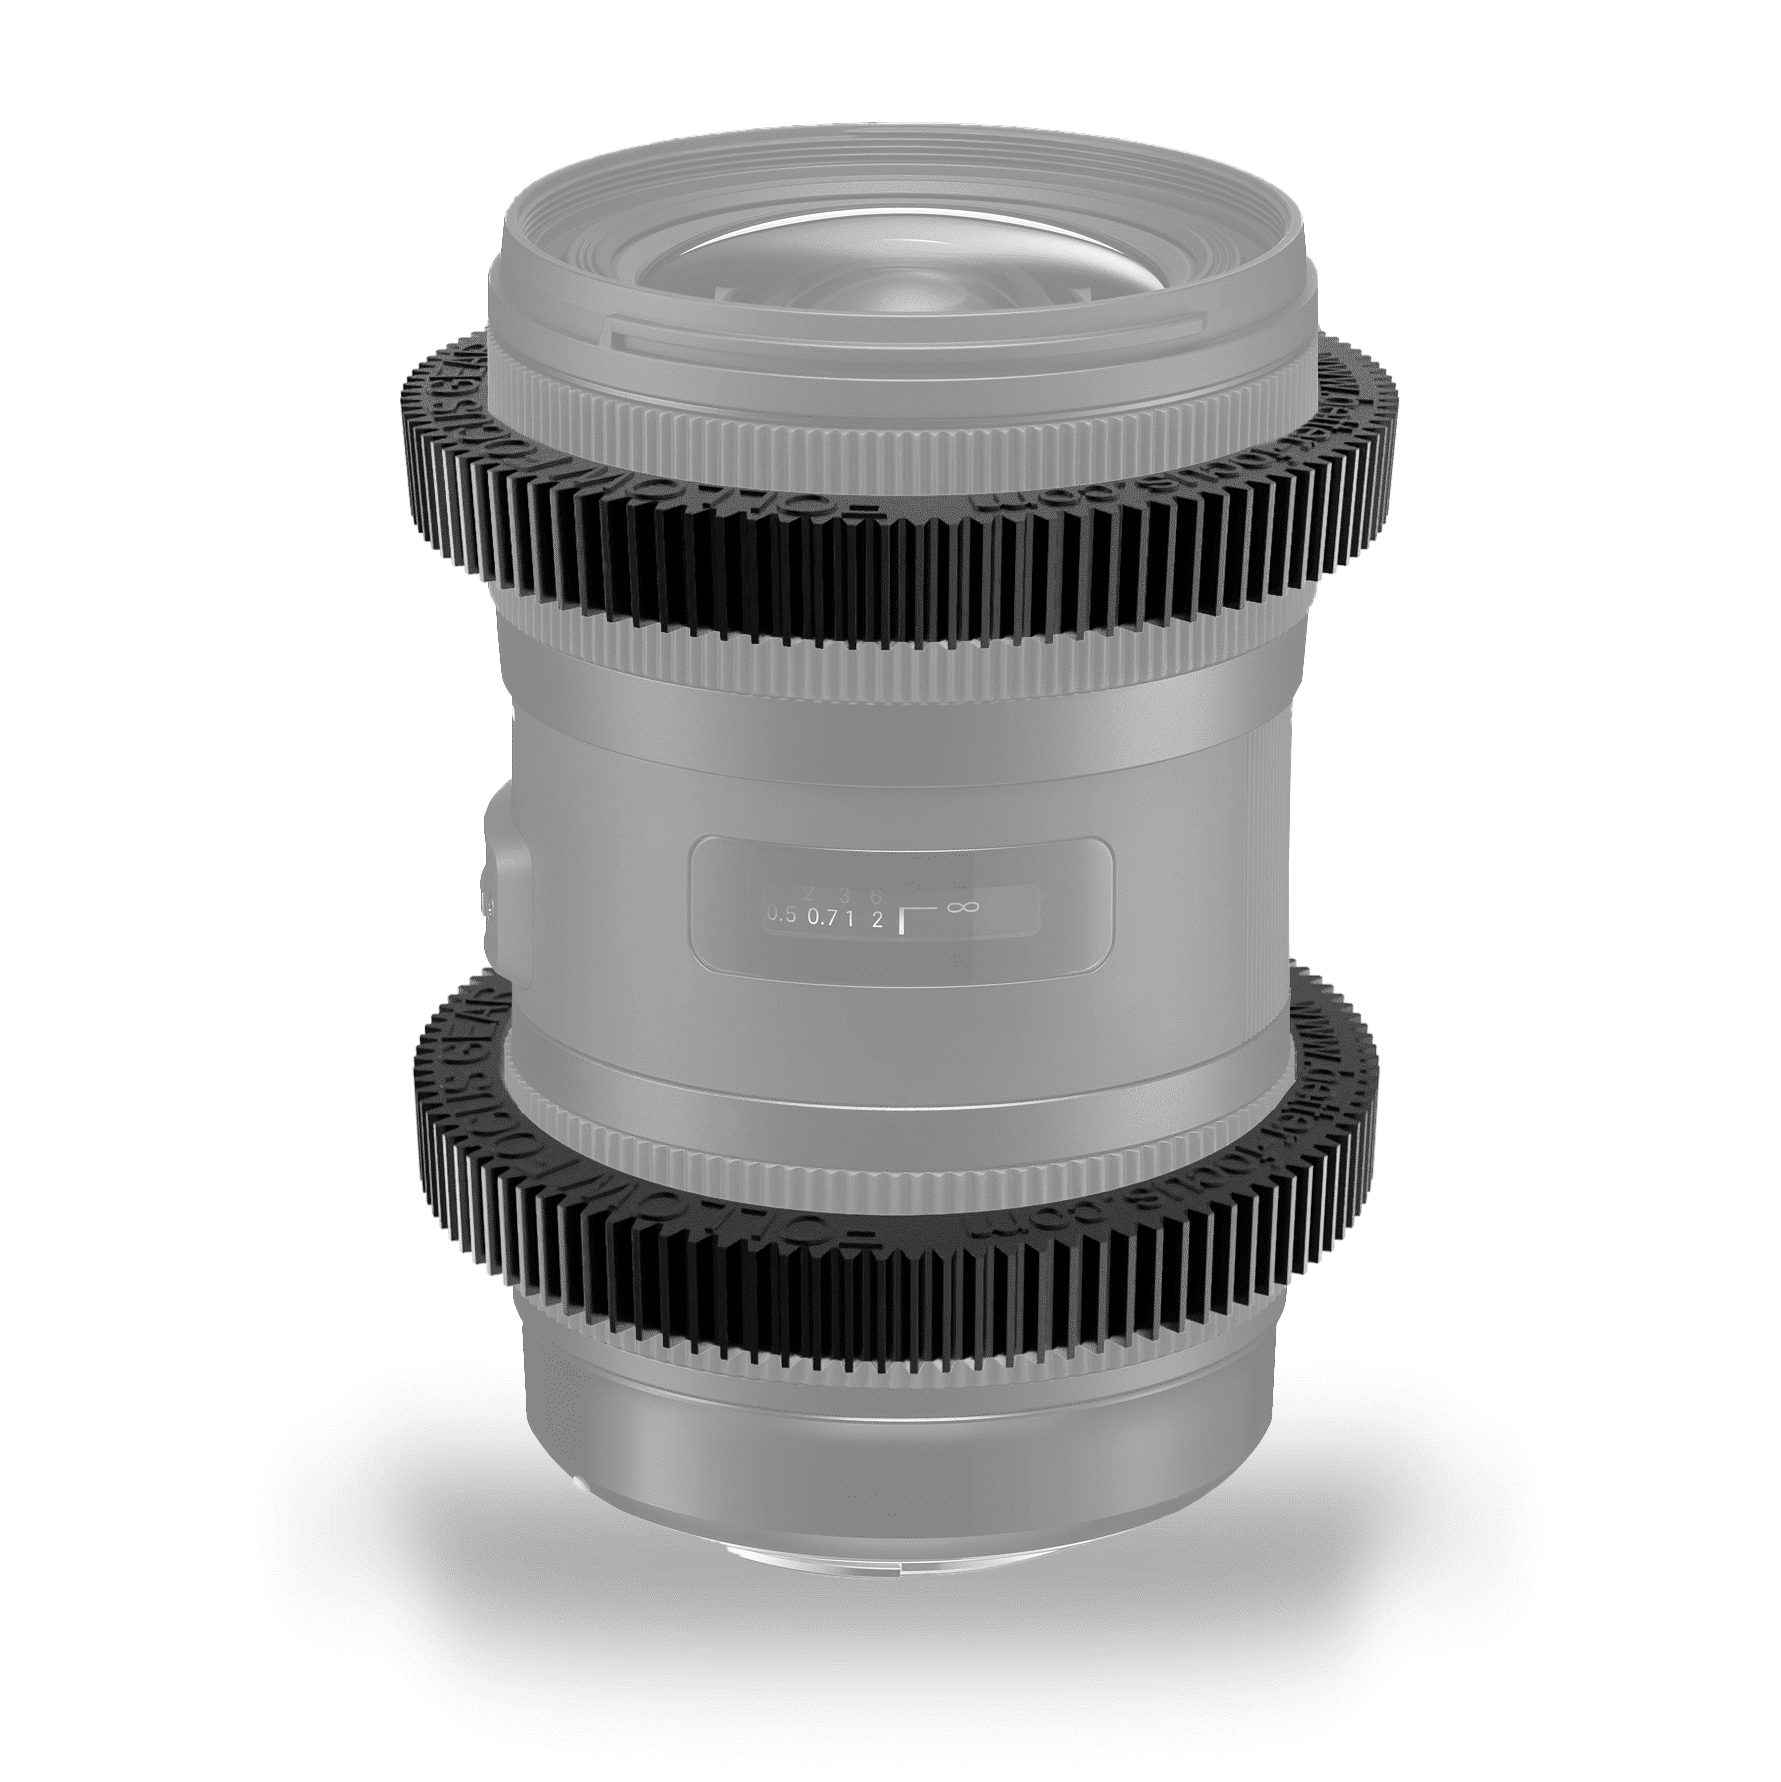 Follow Focus Ring for CANON EF 17-40MM F4 L SERIES USM lens